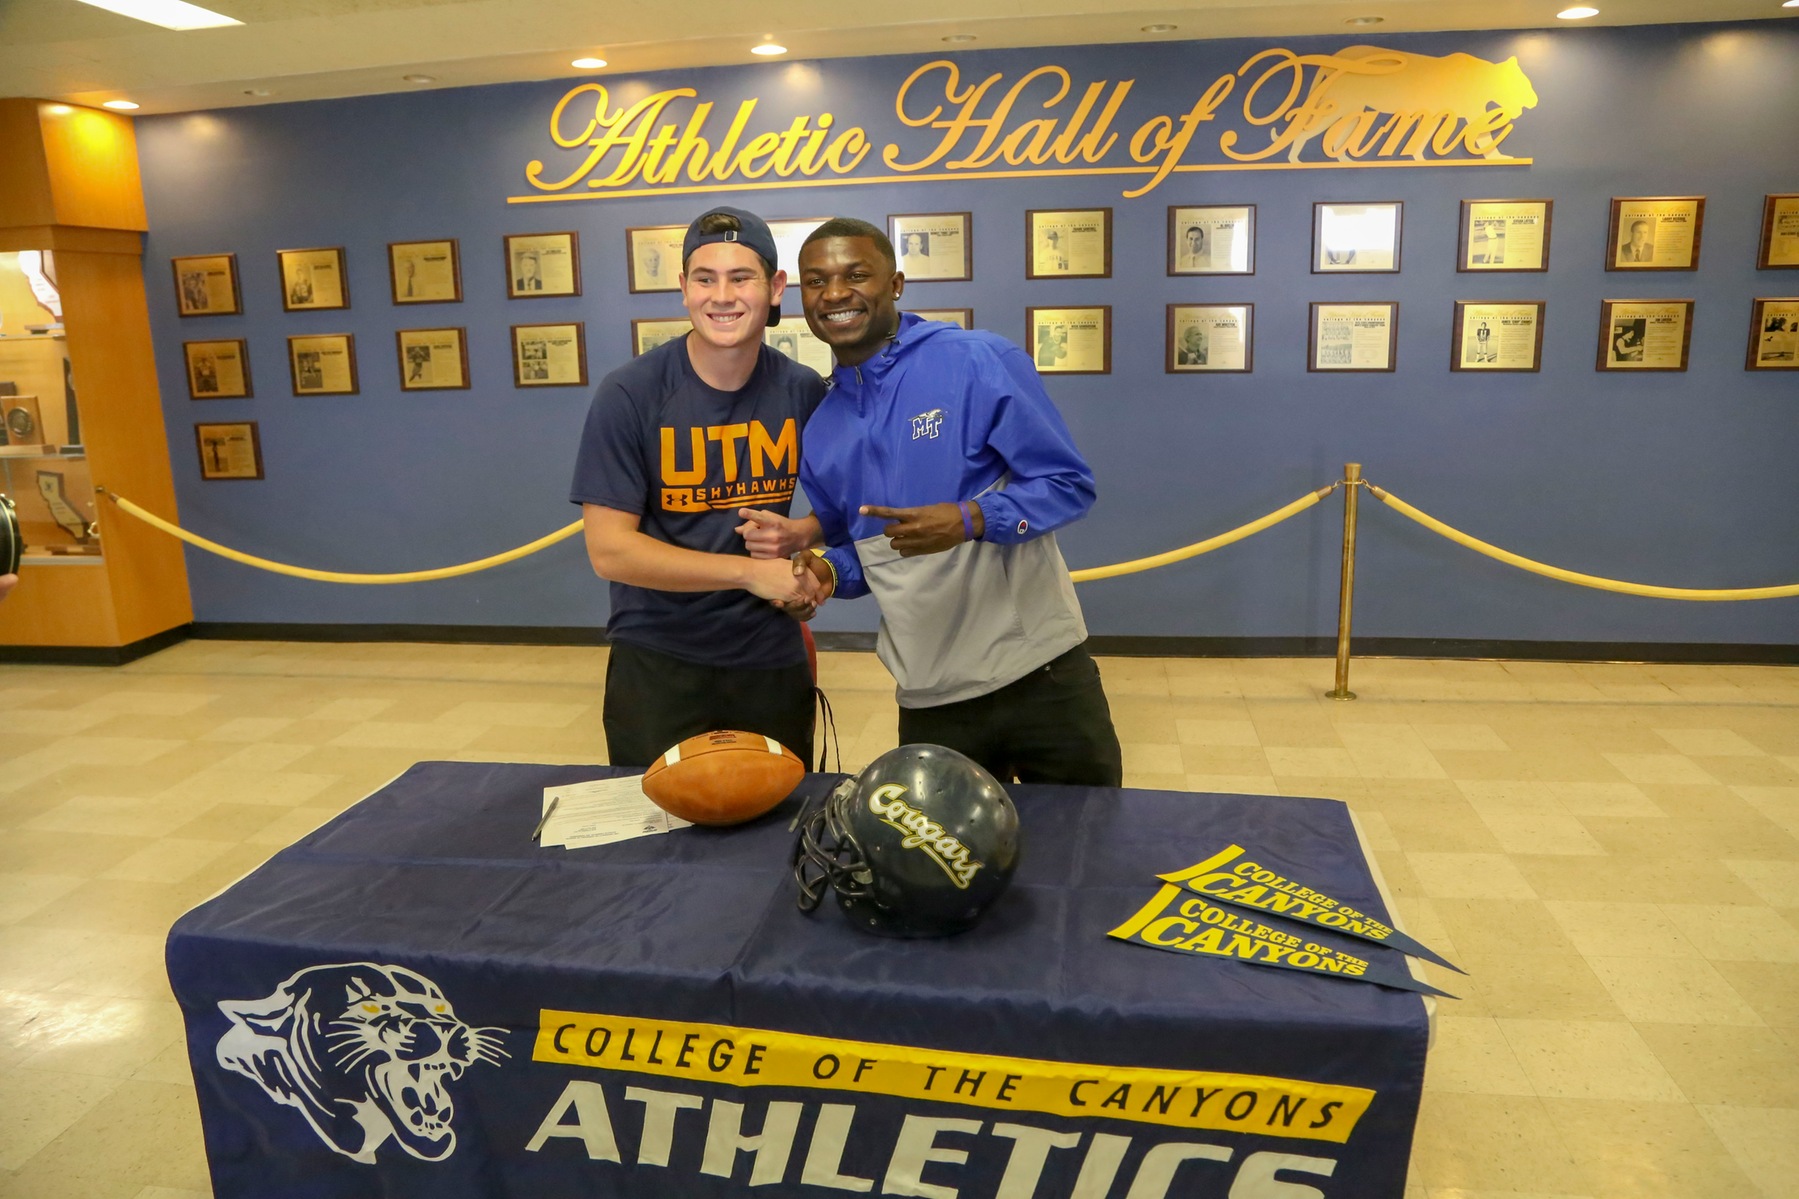 College of the Canyons sophomores quarterback Wyatt Eget (University of Tennessee at Martin) and wide receiver Jarrin Pierce (Middle Tennessee State University) signed their NLIs during a ceremony at the college on Dec. 19. 
—Jesse Muñoz/COC Sports Information Director